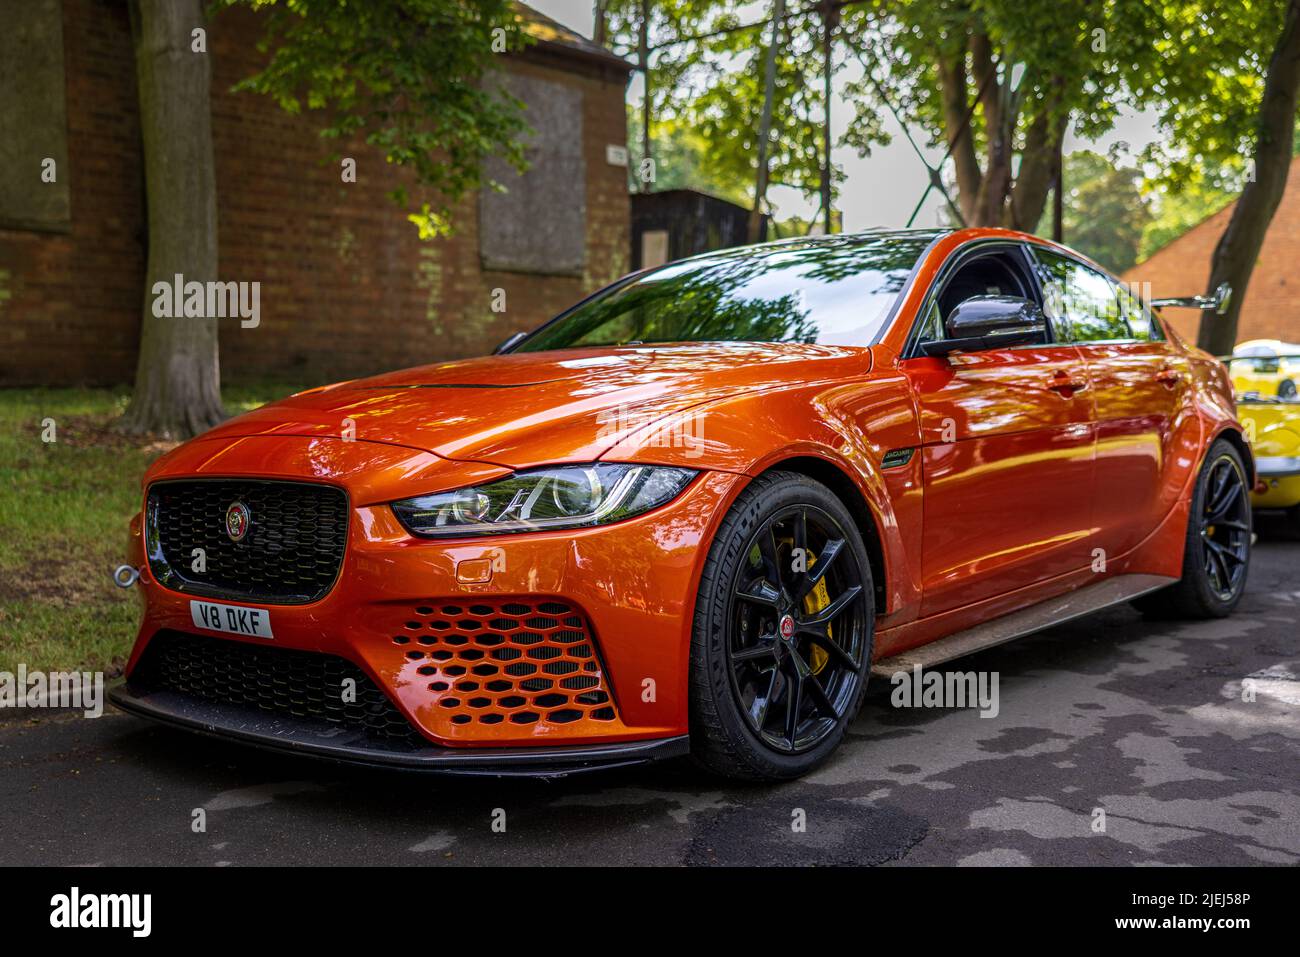 Jaguar XE 5.0 Supercharged V8 SV Project 8 ‘V8 DKF’ on display at the Bicester scramble held at the Bicester Heritage Centre on the 19th June 2022 Stock Photo